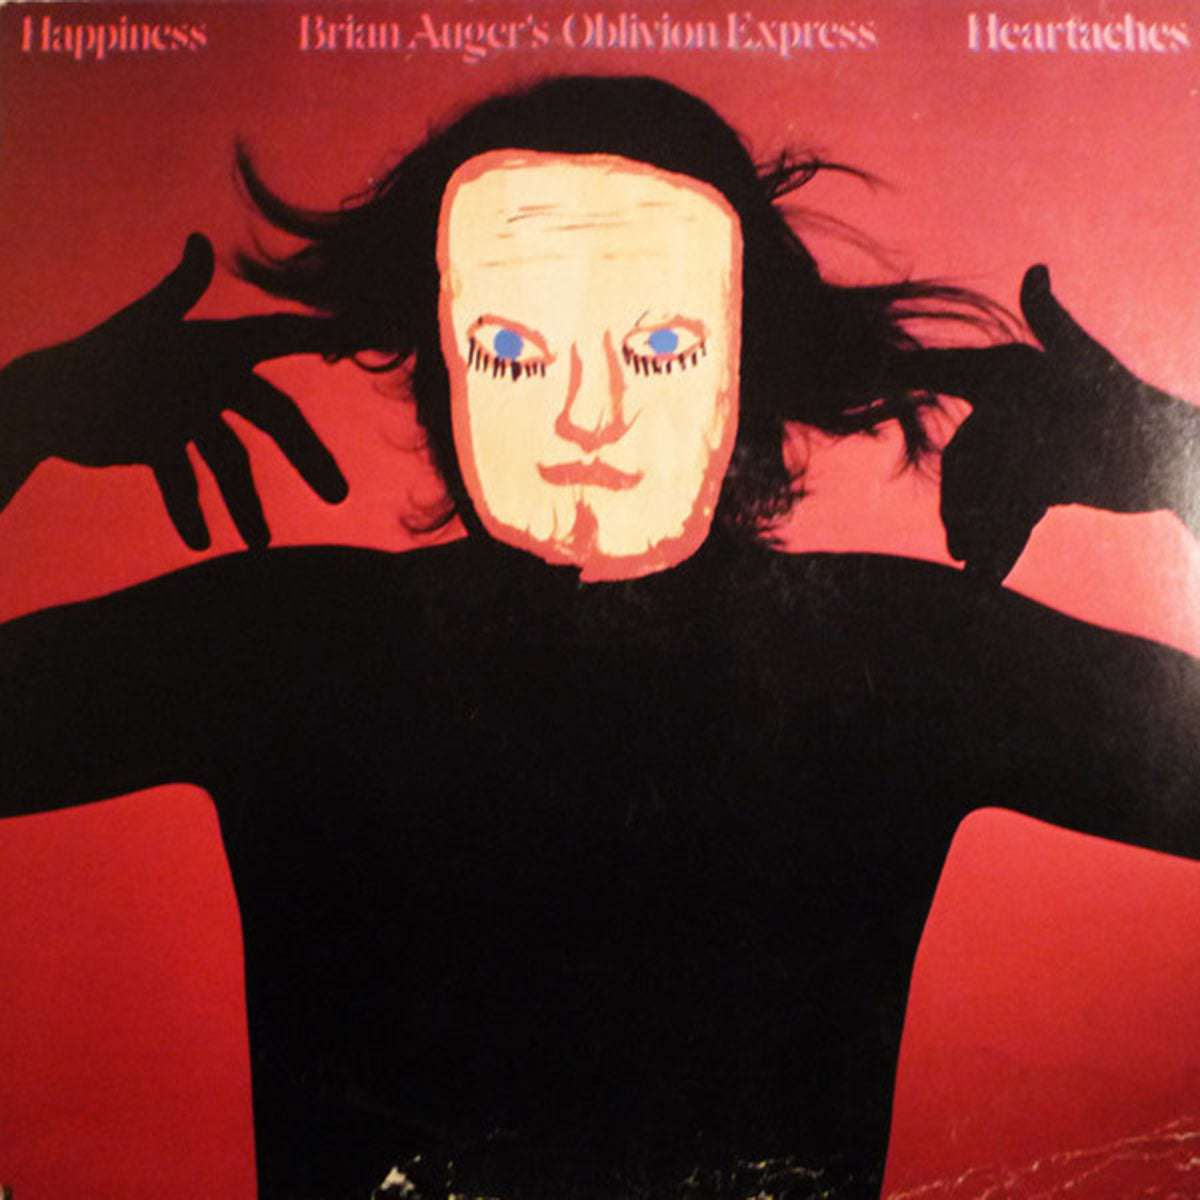 Brian Auger's Oblivion Express – Happiness Heartaches - US Pressing